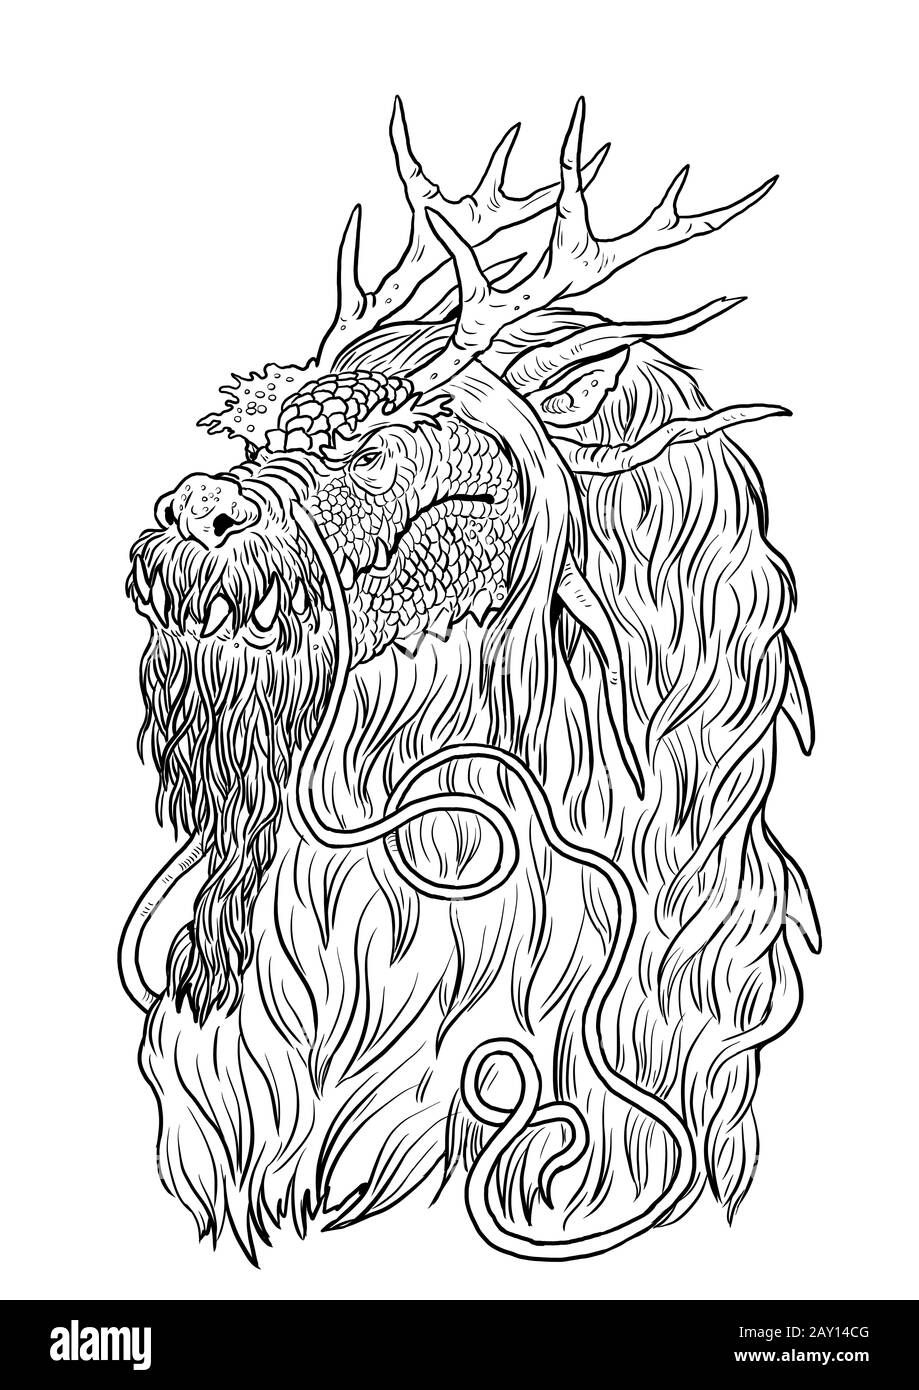 Chinese dragon long coloring page. Outline illustration. Dragon drawing coloring sheet. Stock Photo